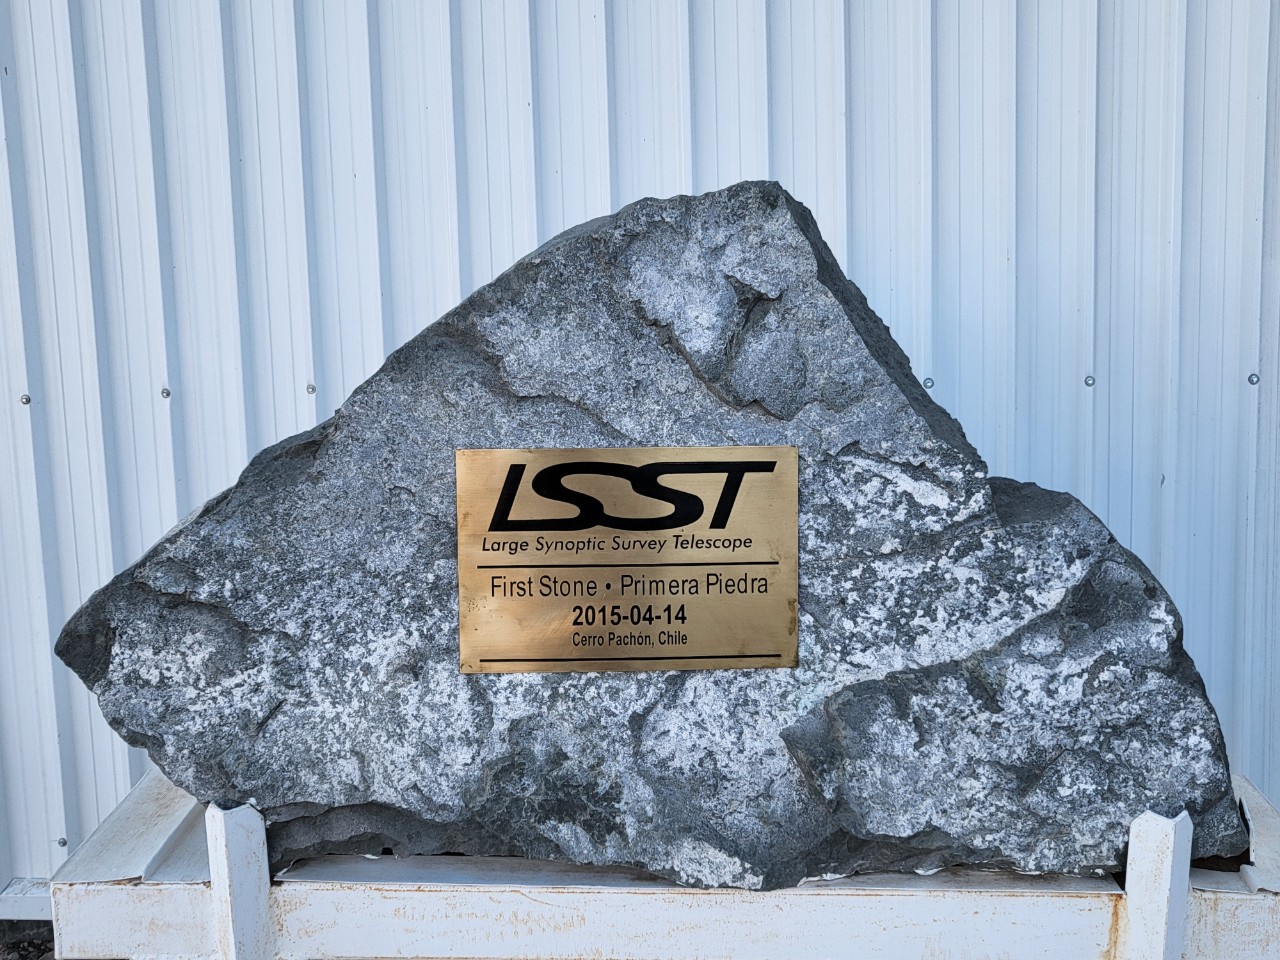 The first stone of LSST, in front of the building entrance.